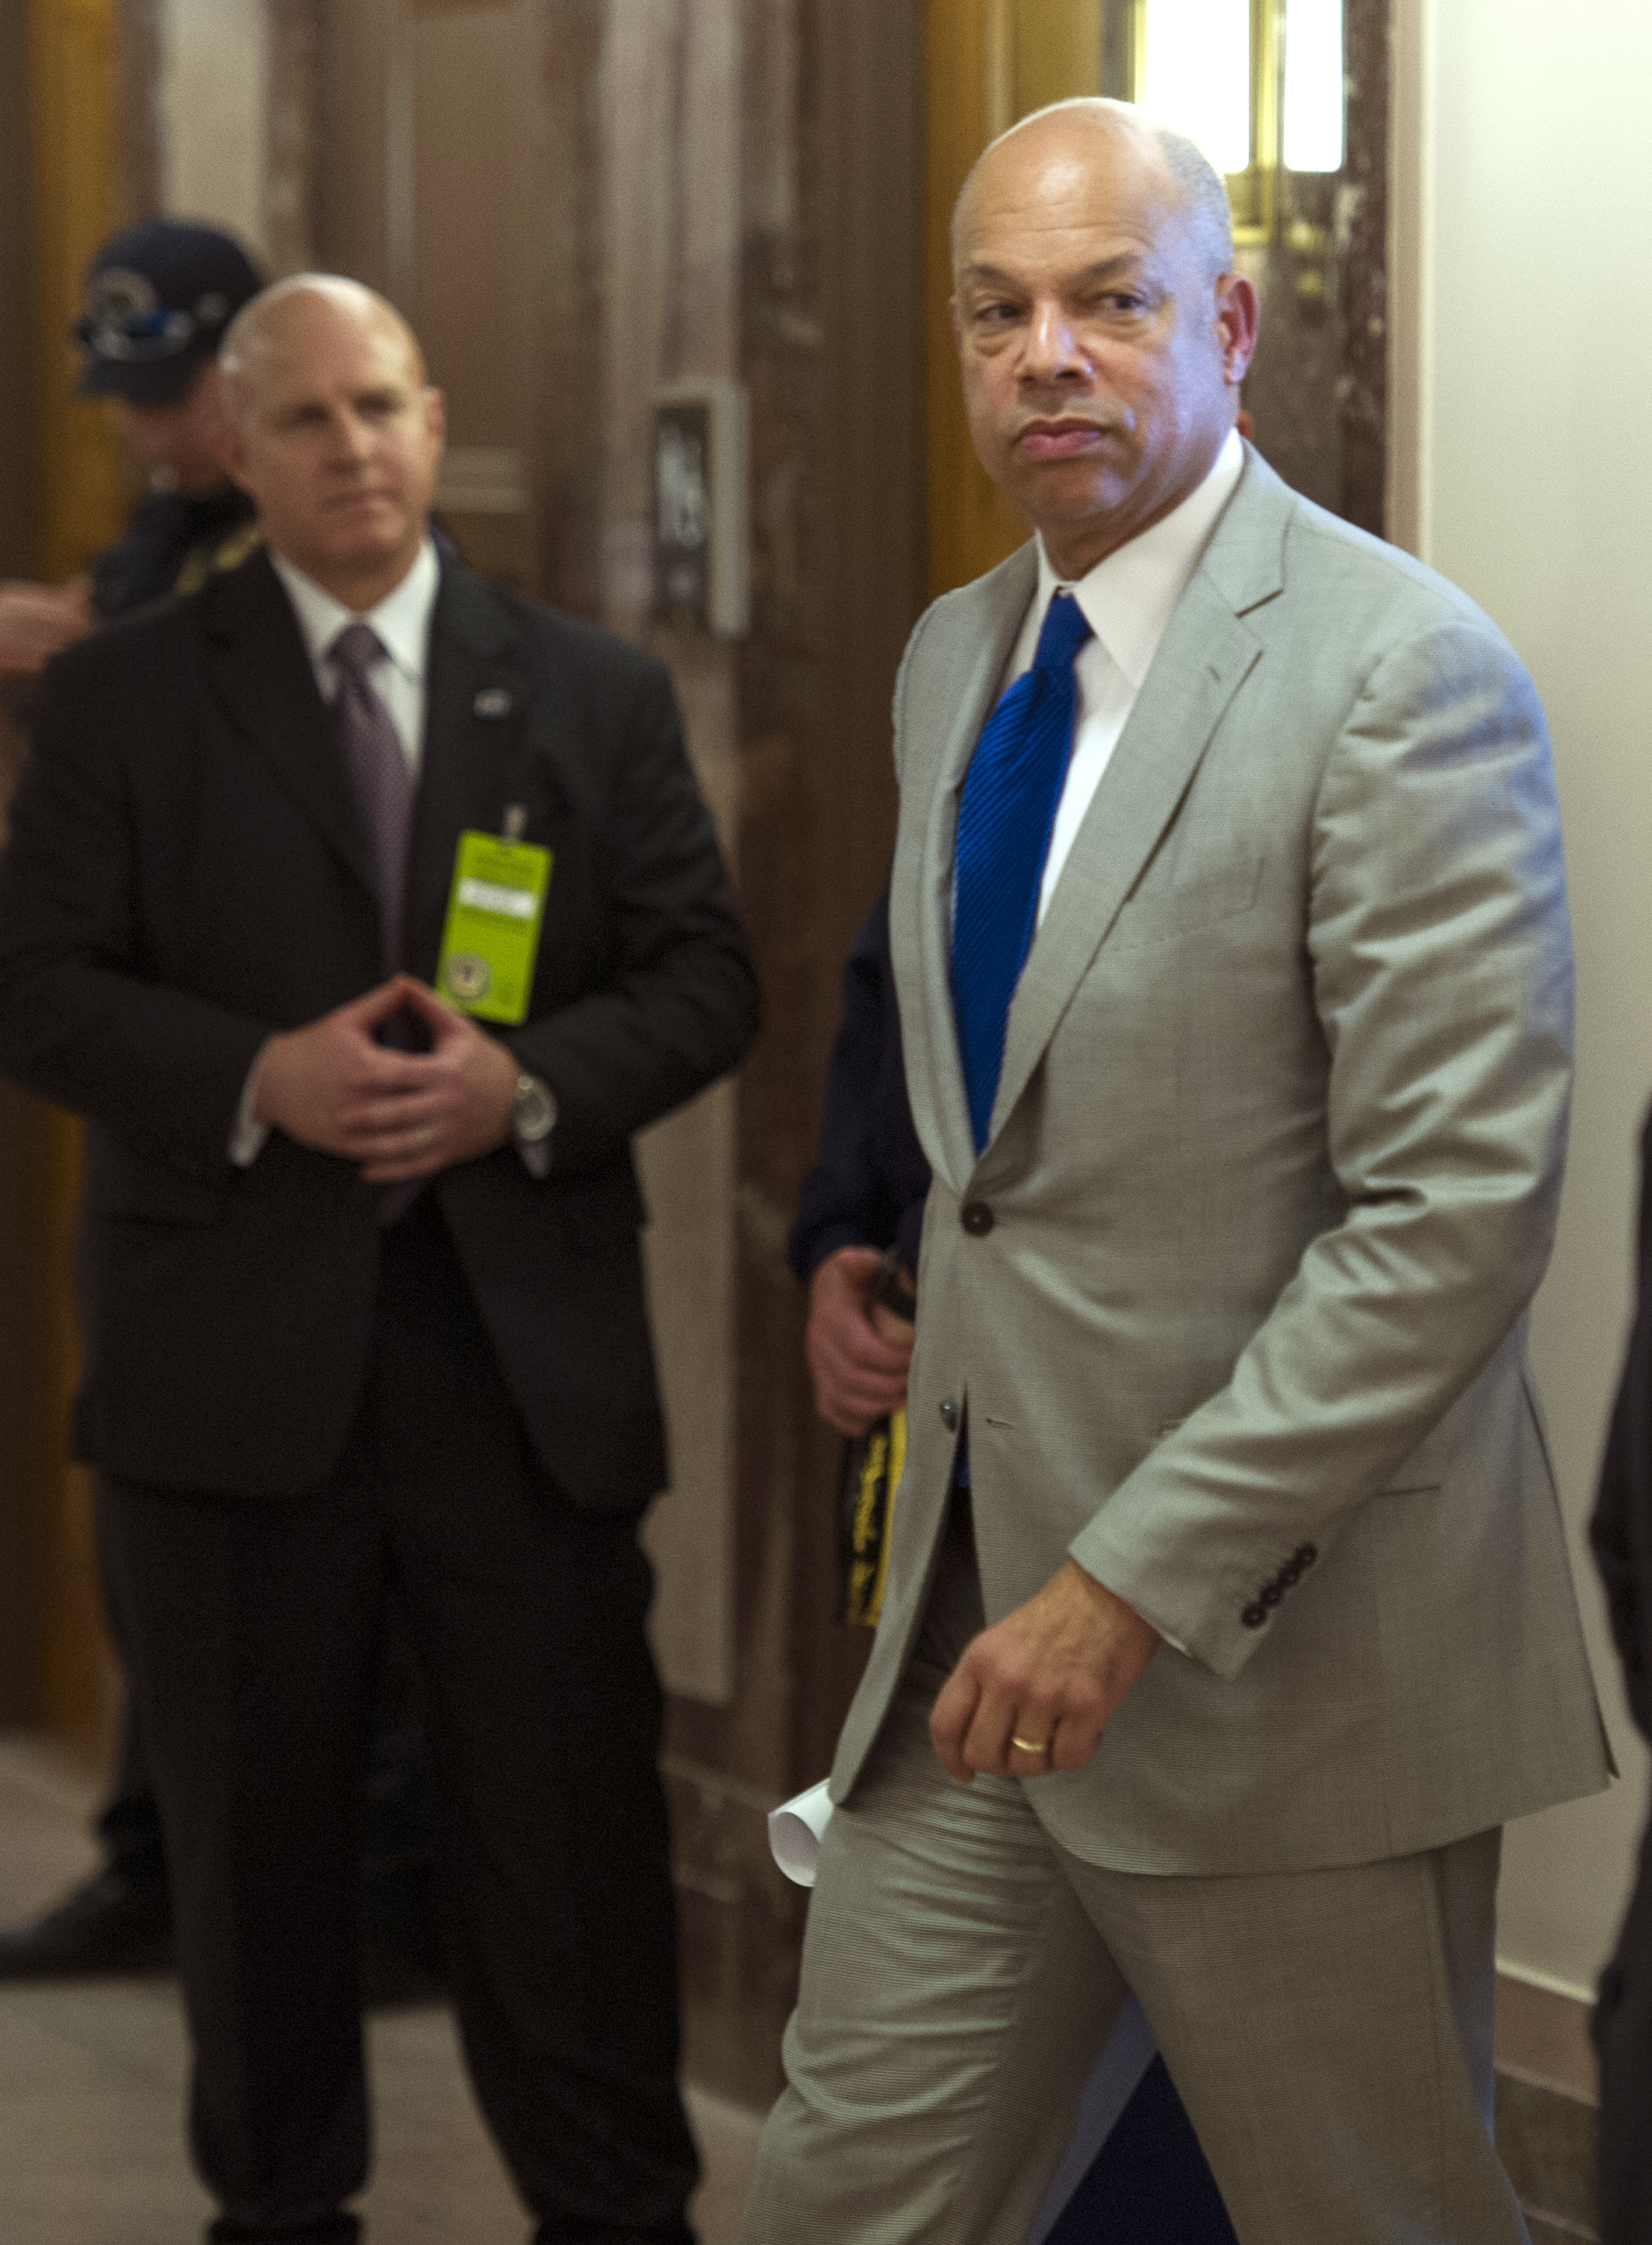 Homeland Security Secretary Jeh Johnson walks to a hearing room to answer questions before a closed meeting of the Senate Homeland Security Committee in Washington, D.C., on April 1, 2014. (Cliff Owen—AP)